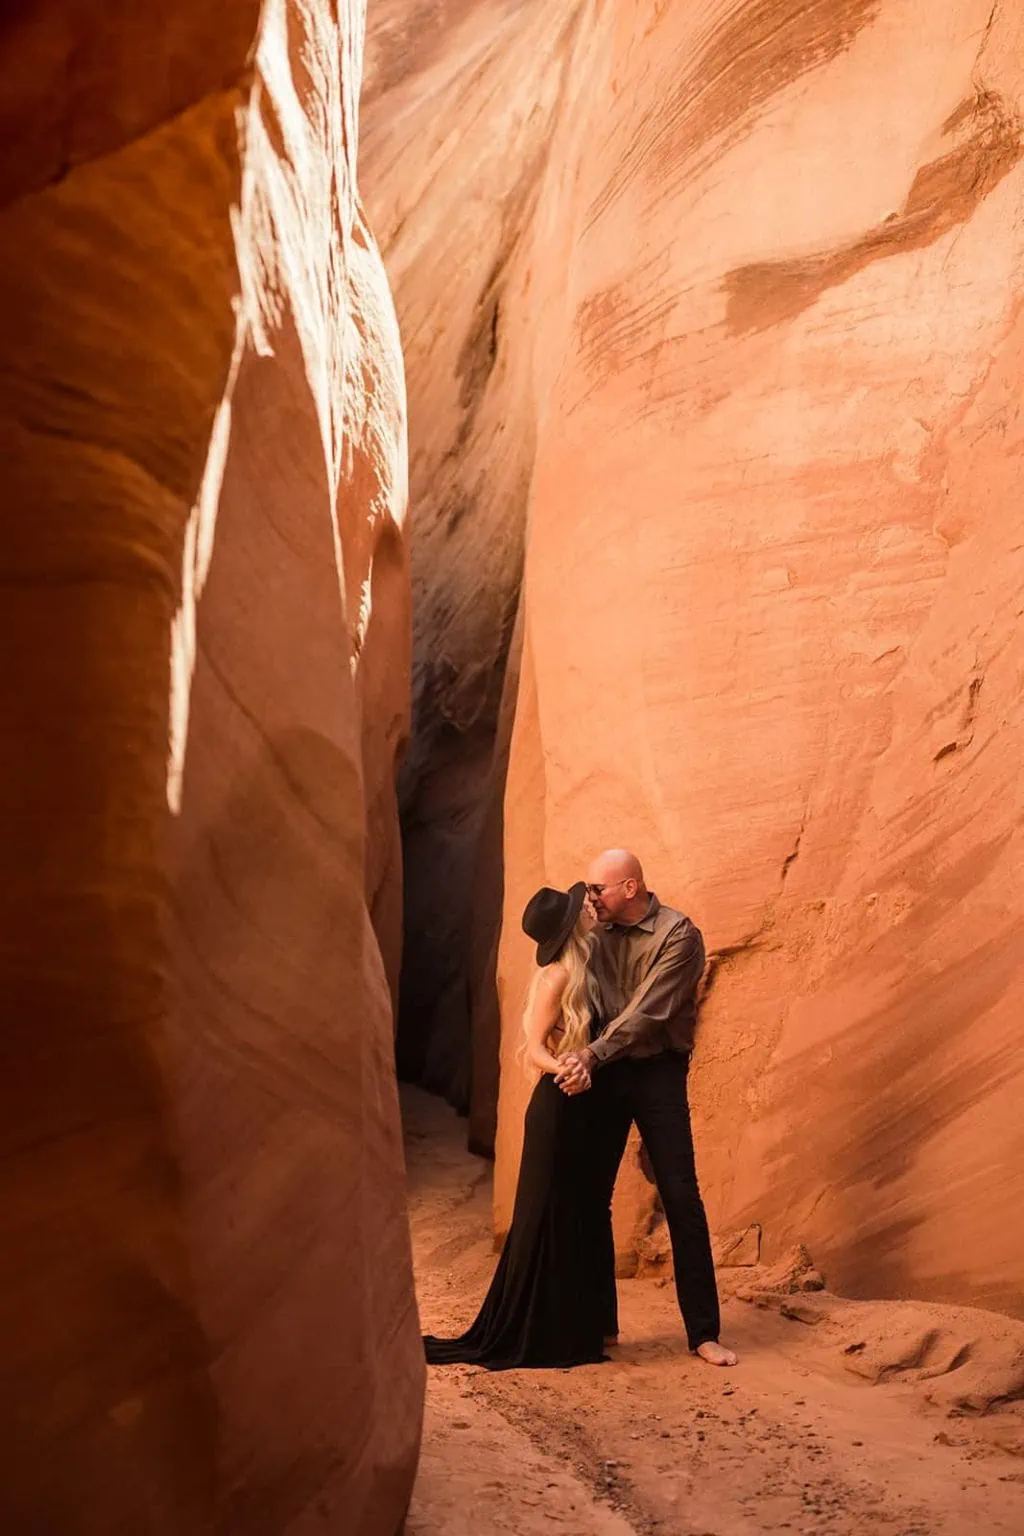 A bride and groom kiss each other in a red rock slot canyon.